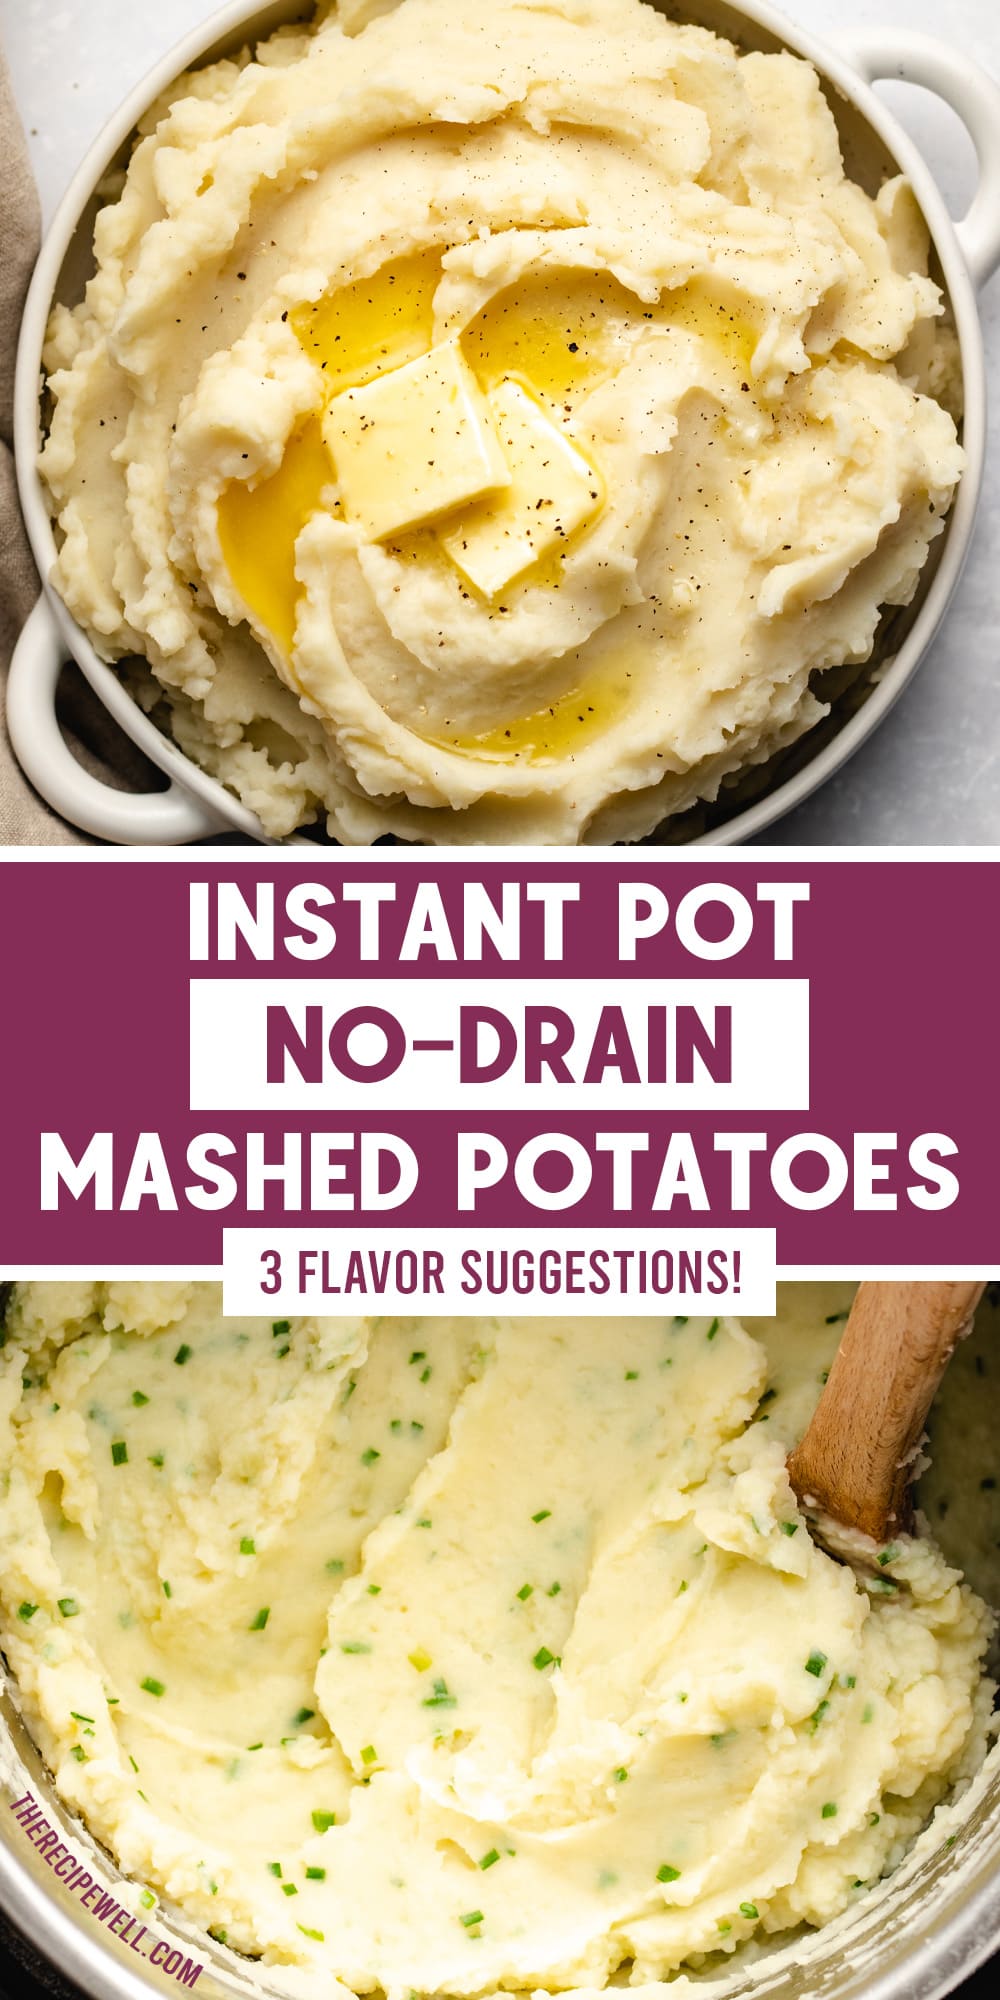 These No Drain Instant Pot Mashed Potatoes are SO easy. With 3 flavour variations (Basic Butter, Sour Cream & Chive and Garlic Rosemary), you'll want to add mashed potatoes to every meal. Save stovetop space at your next holiday meal and make mashed potatoes in the Instant Pot! FOLLOW The Recipe Well for more great recipes!

#easy #nodrain #garlic #rosemary #sourcream #chive #butter via @therecipewell